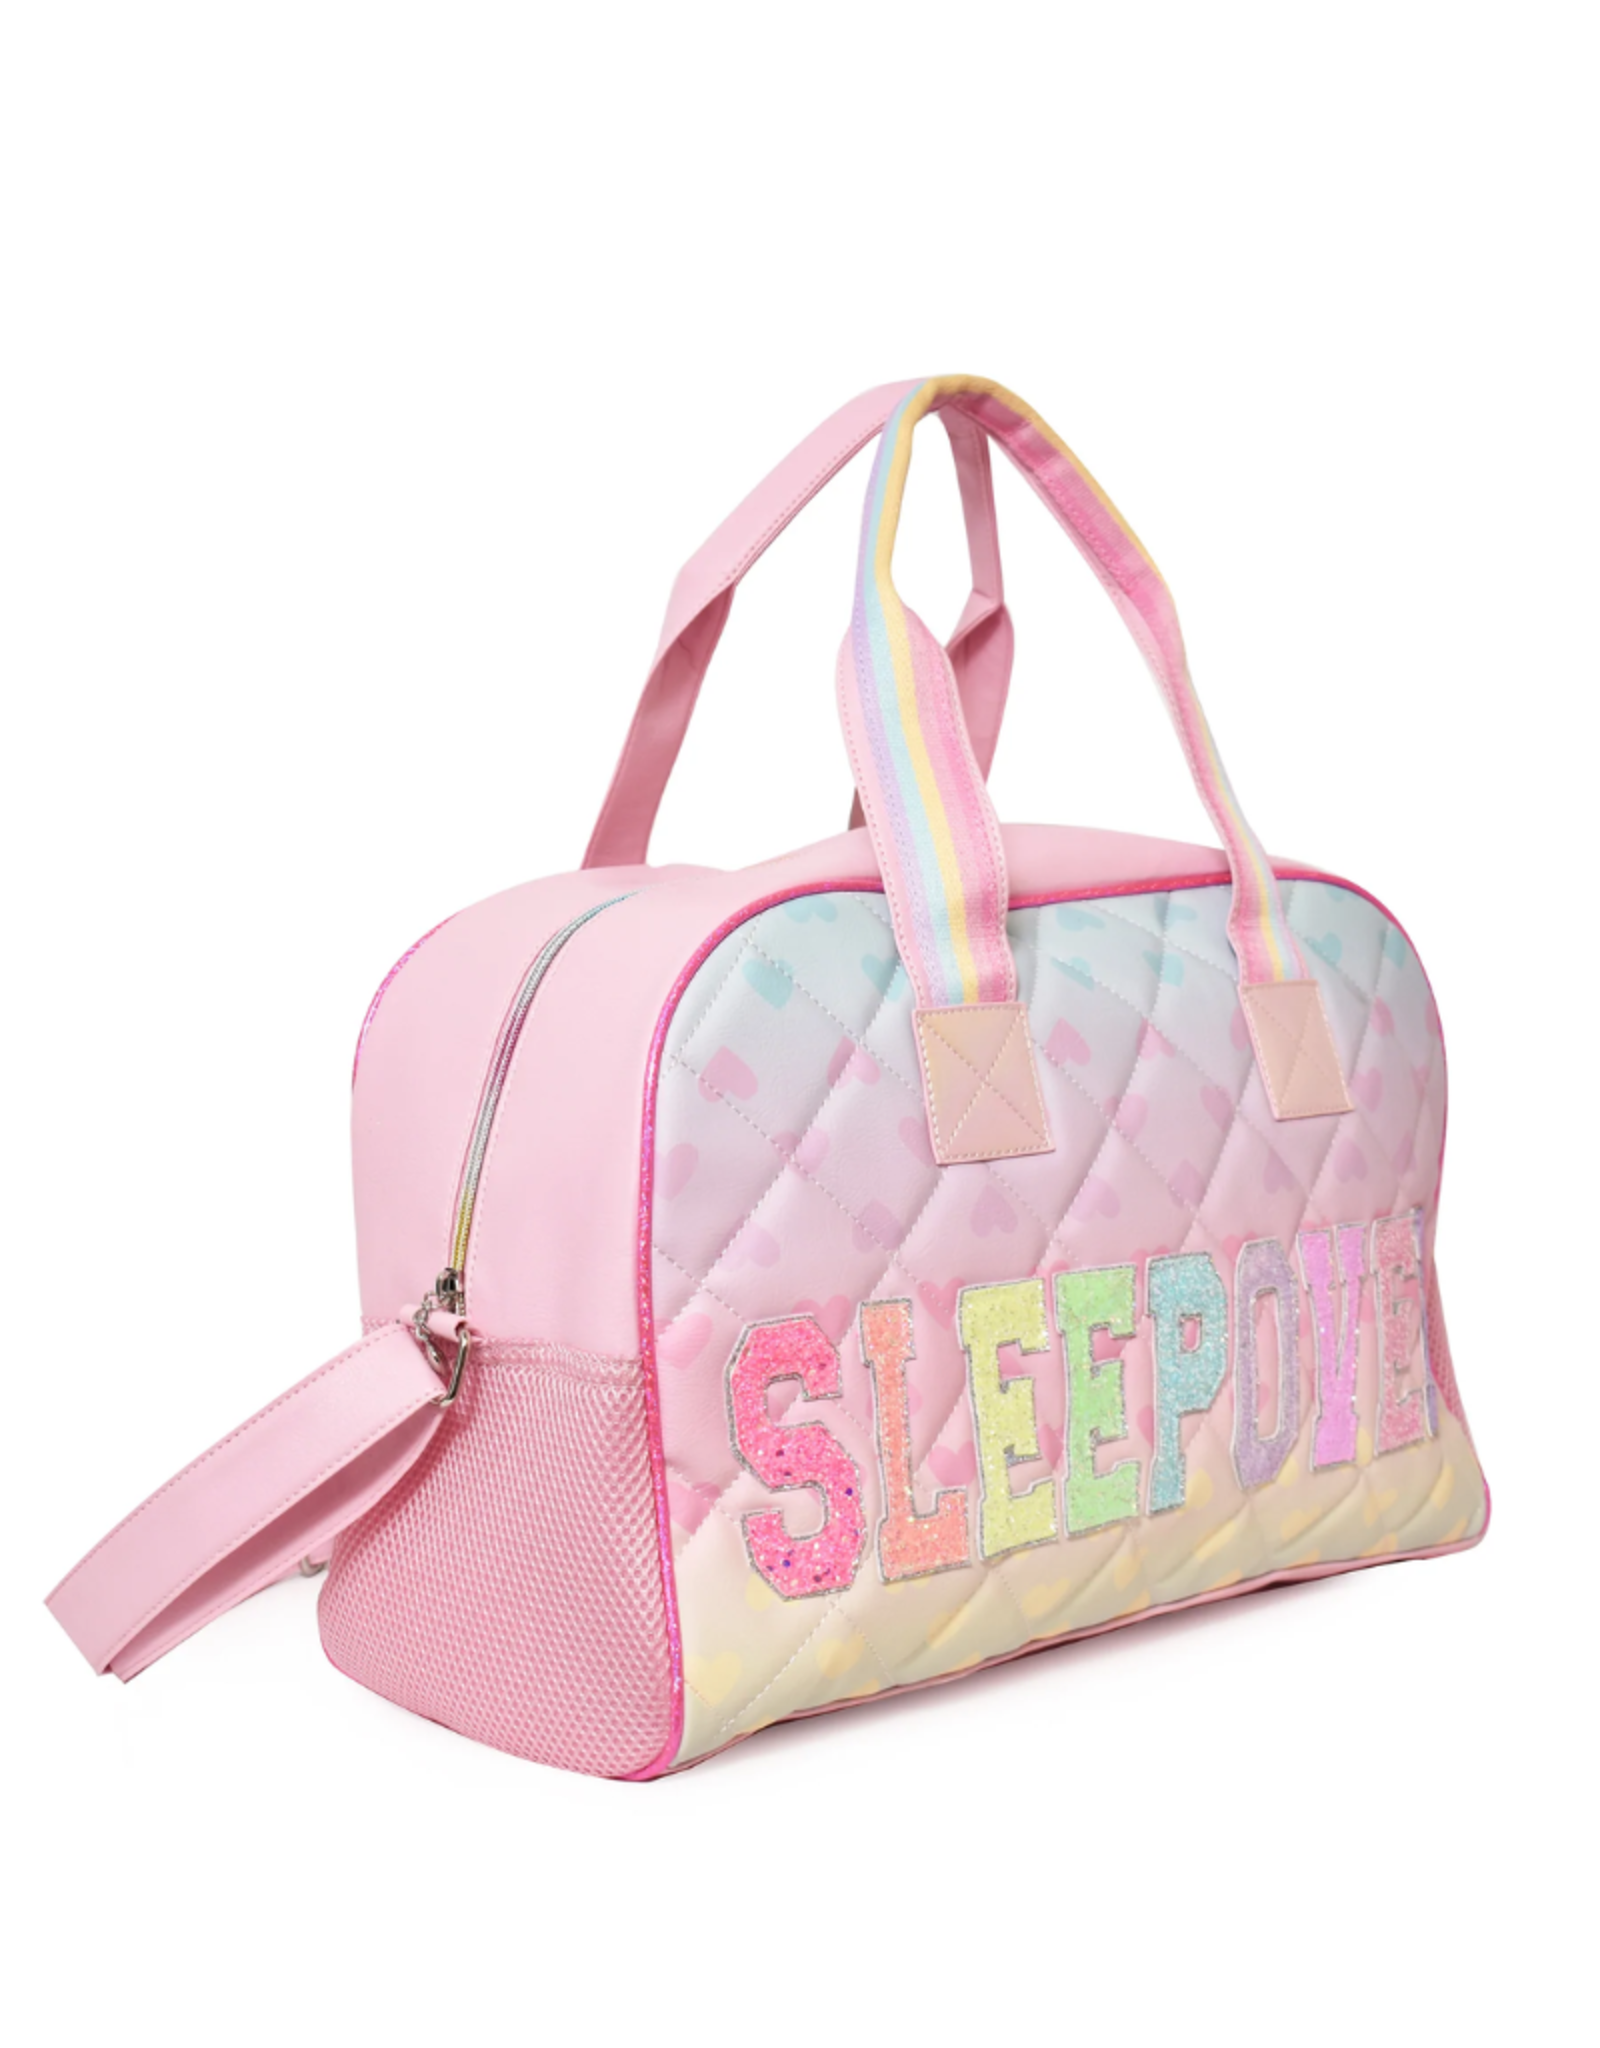 OMG Accessories SLEEPOVER Quilted Ombre Heart Duffle Bag